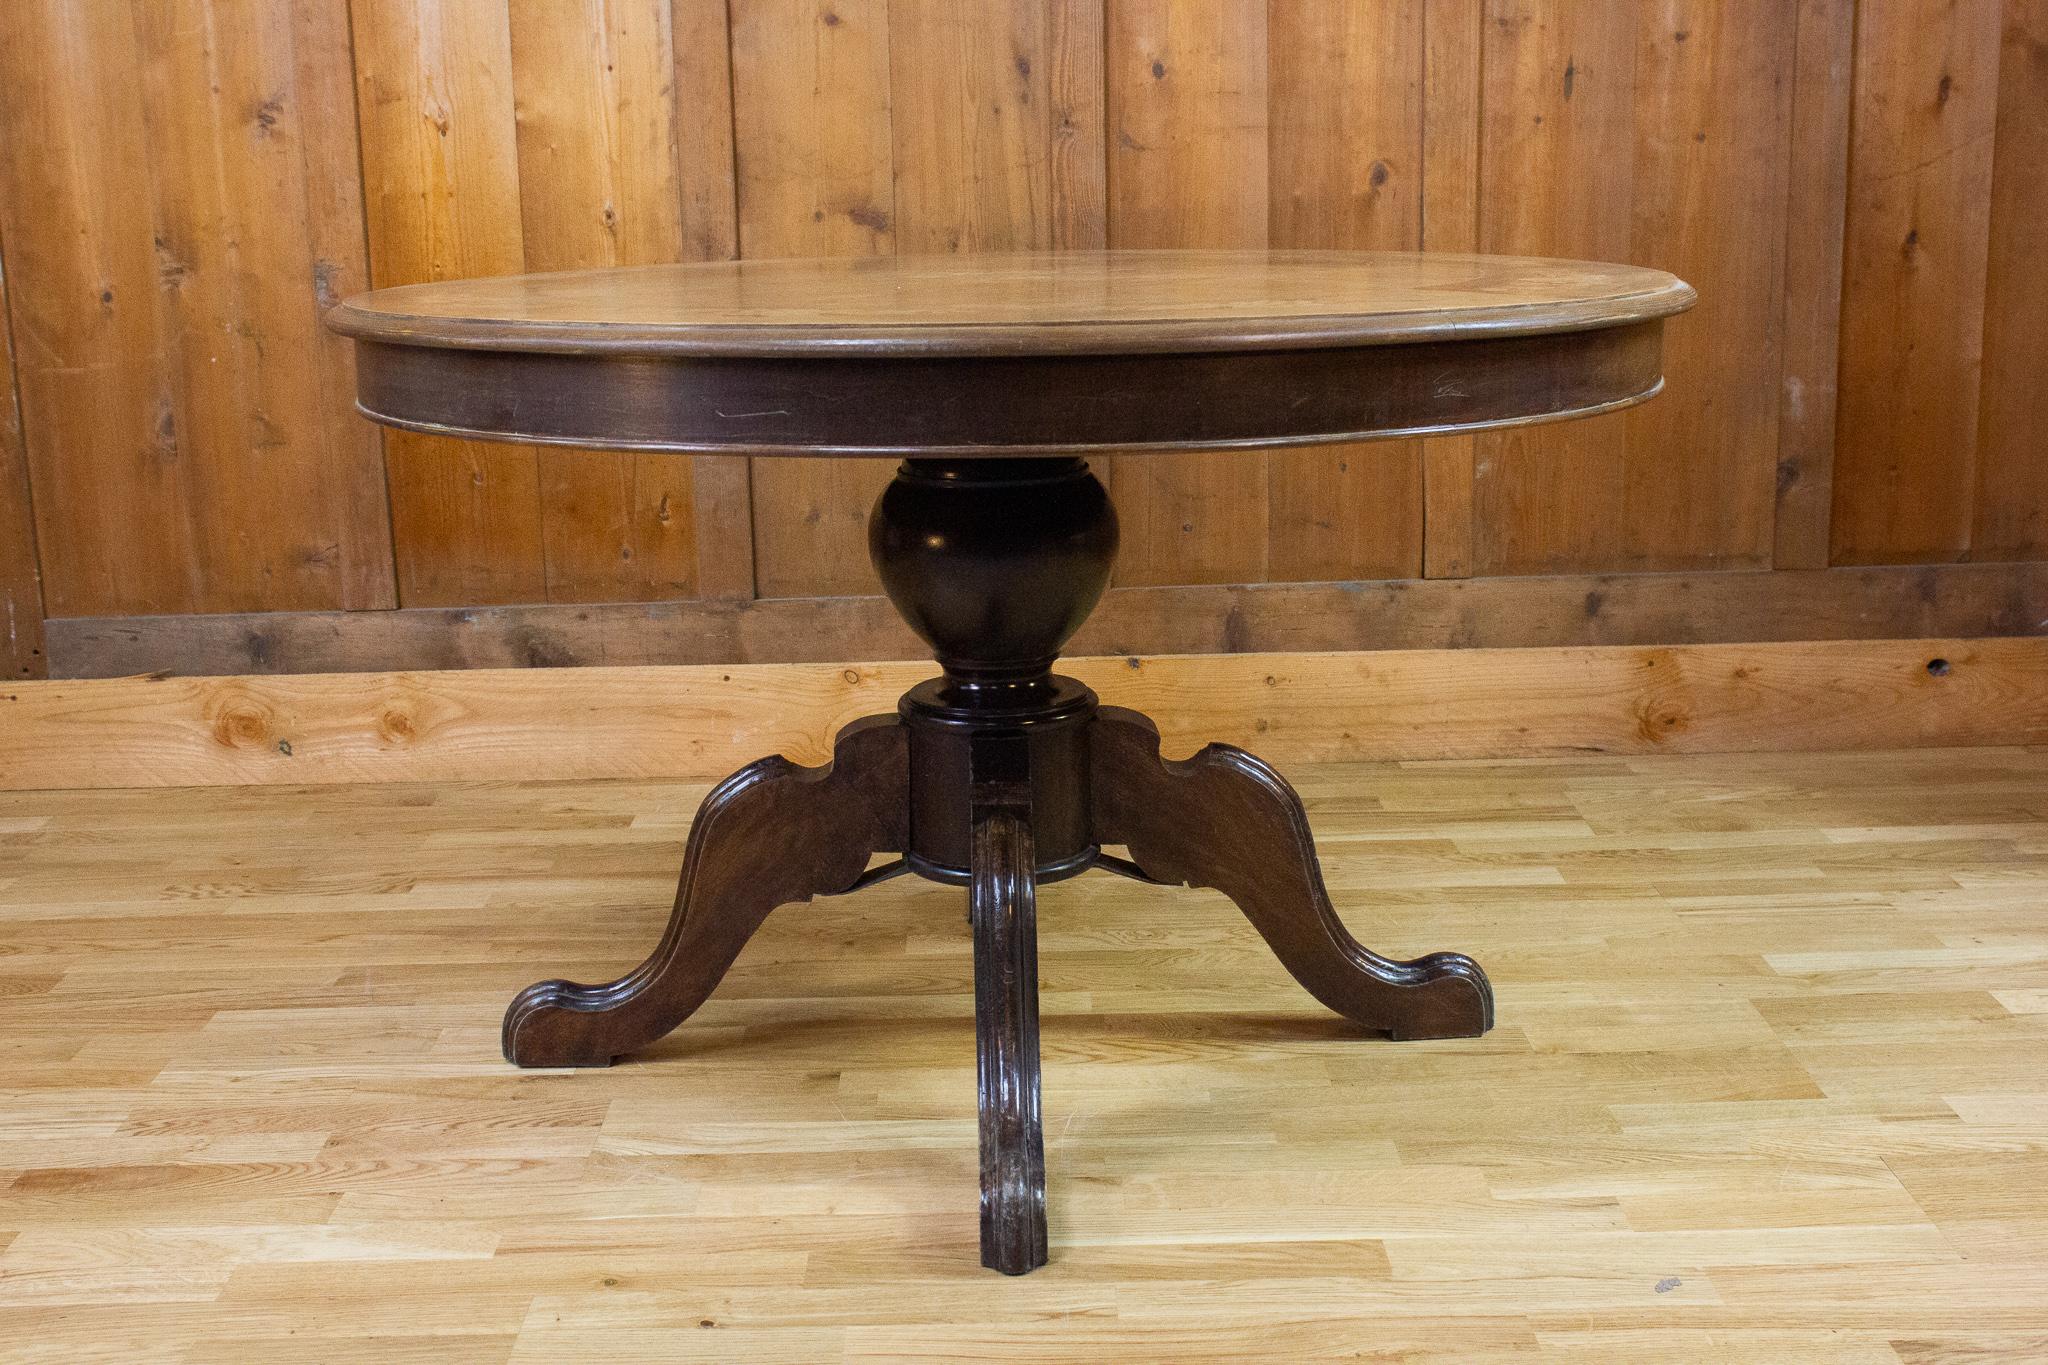 Very nice Louis-Philippe style center table from the 20th century. The body is in black while the elegant light brown top is inlaid with floral and plant motifs.